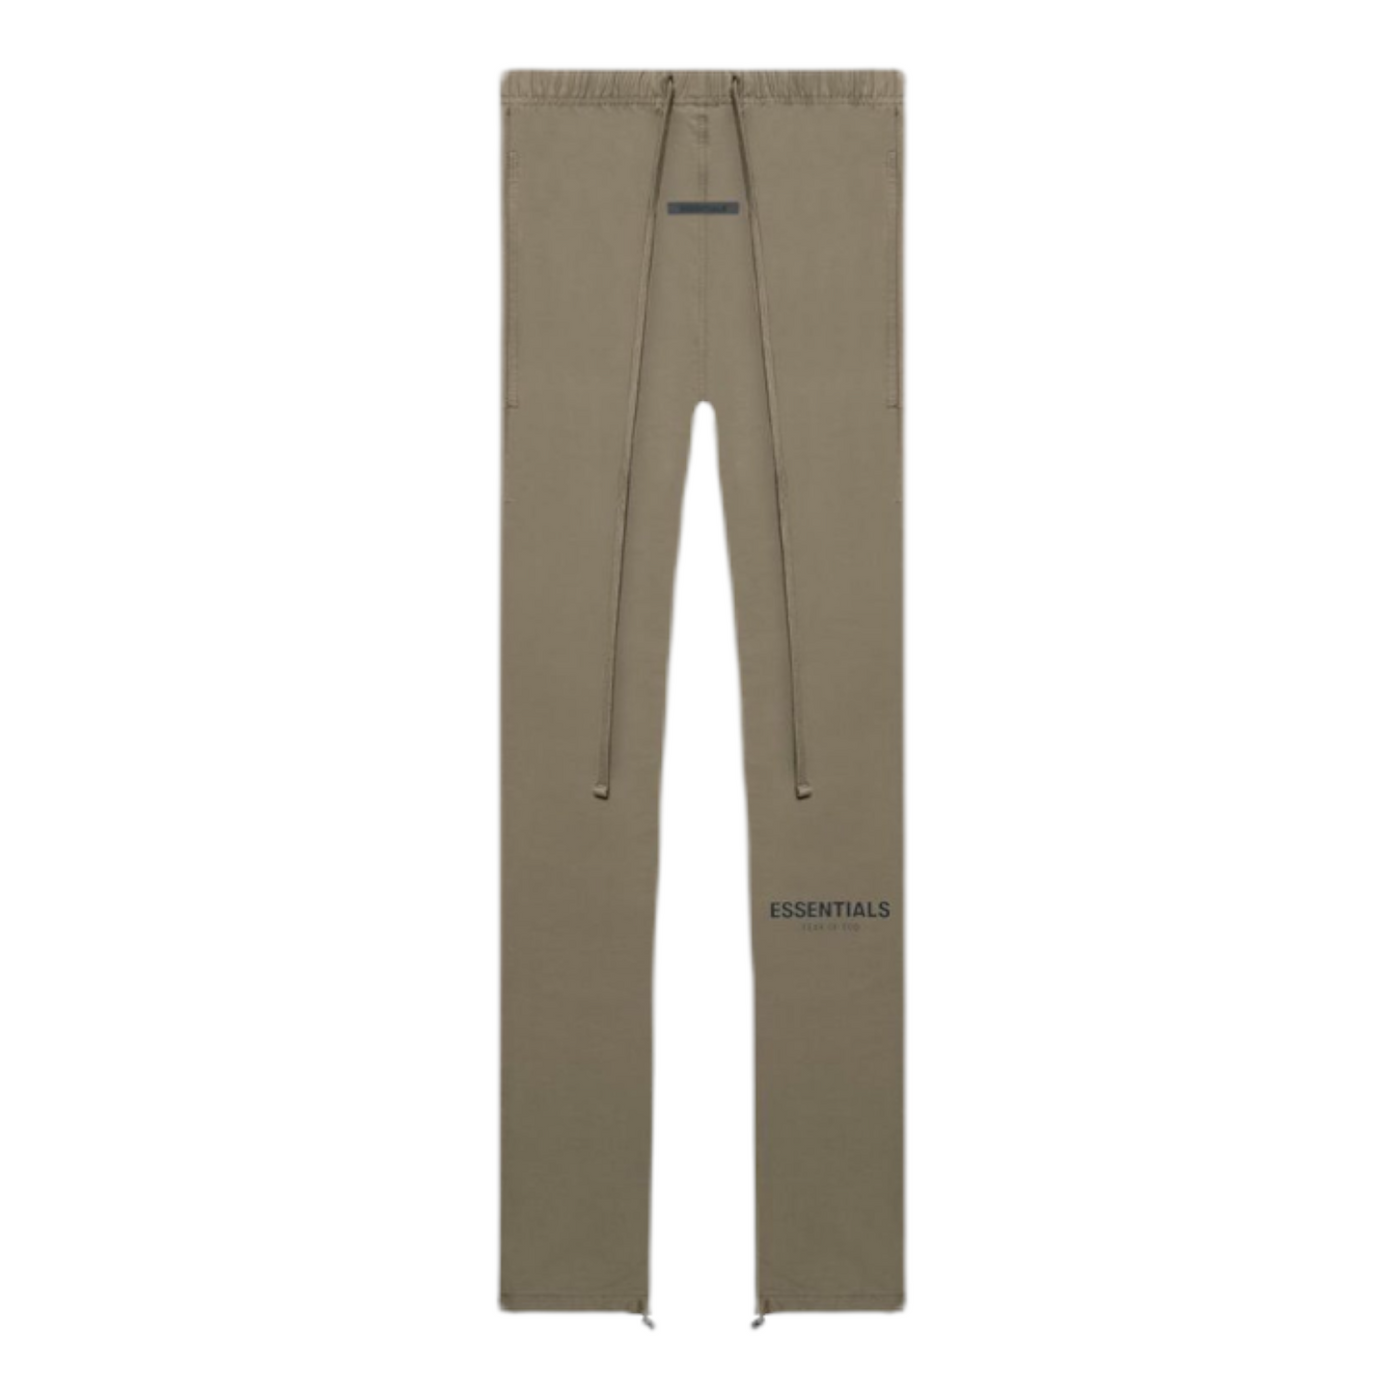 FEAR OF GOD ESSENTIALS TRACK PANT HARVEST